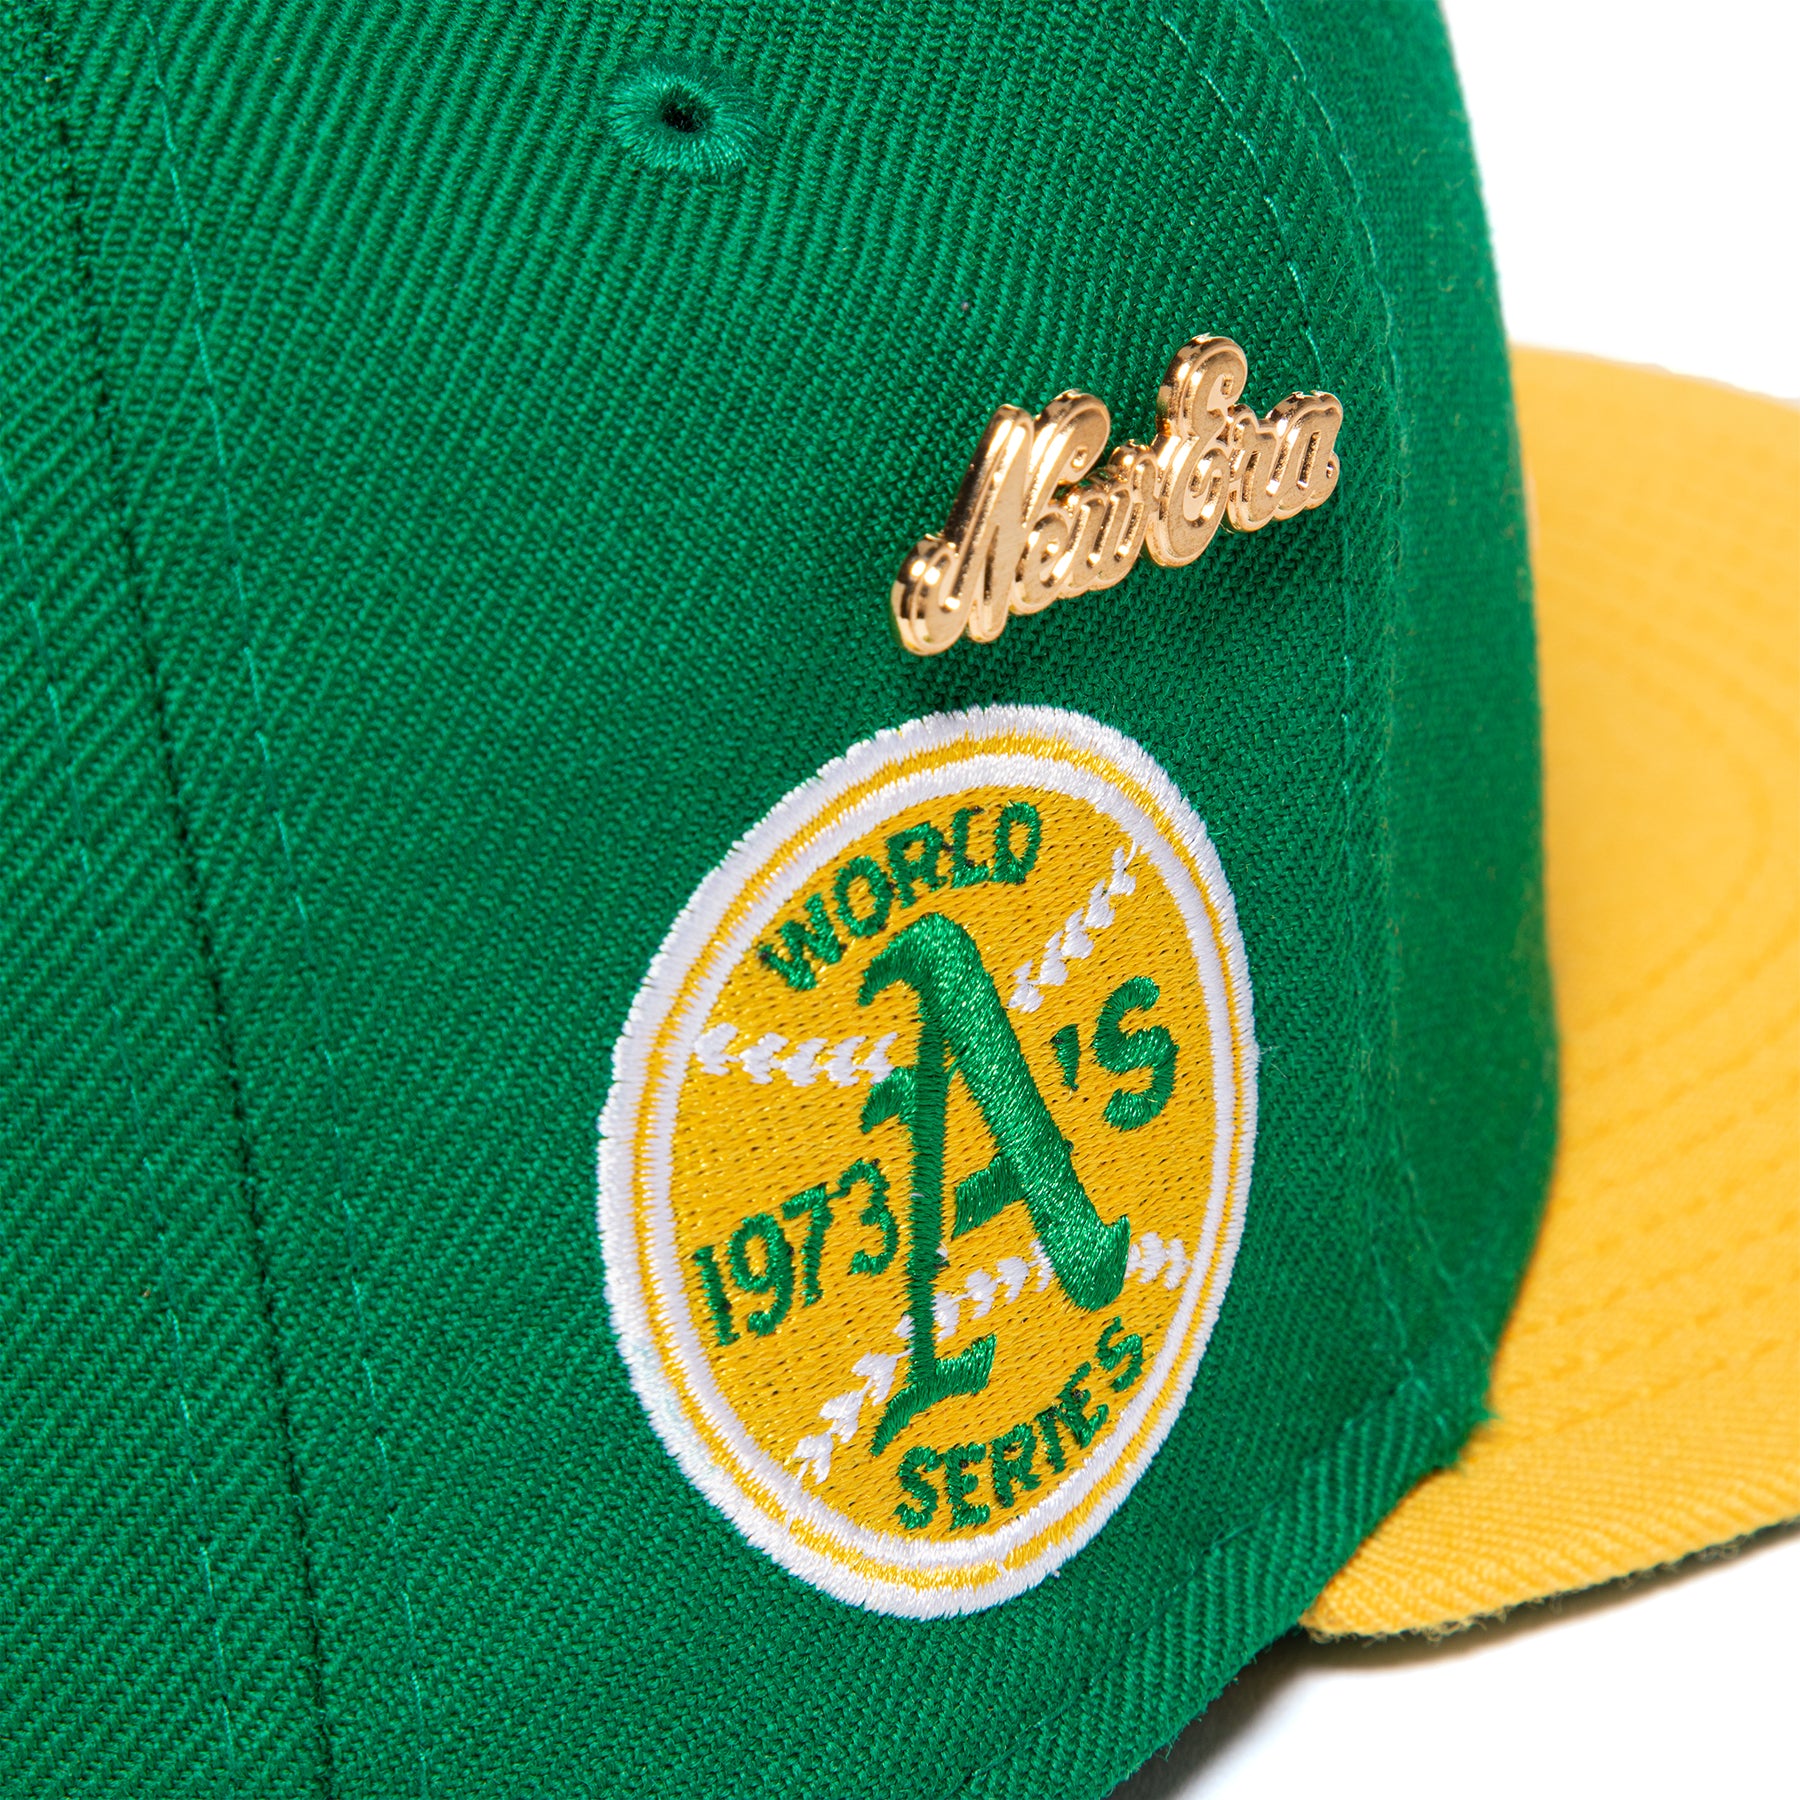 New Era Oakland Athletics Gold Retro Jersey Script 59FIFTY Fitted –  TheColiseum Sports